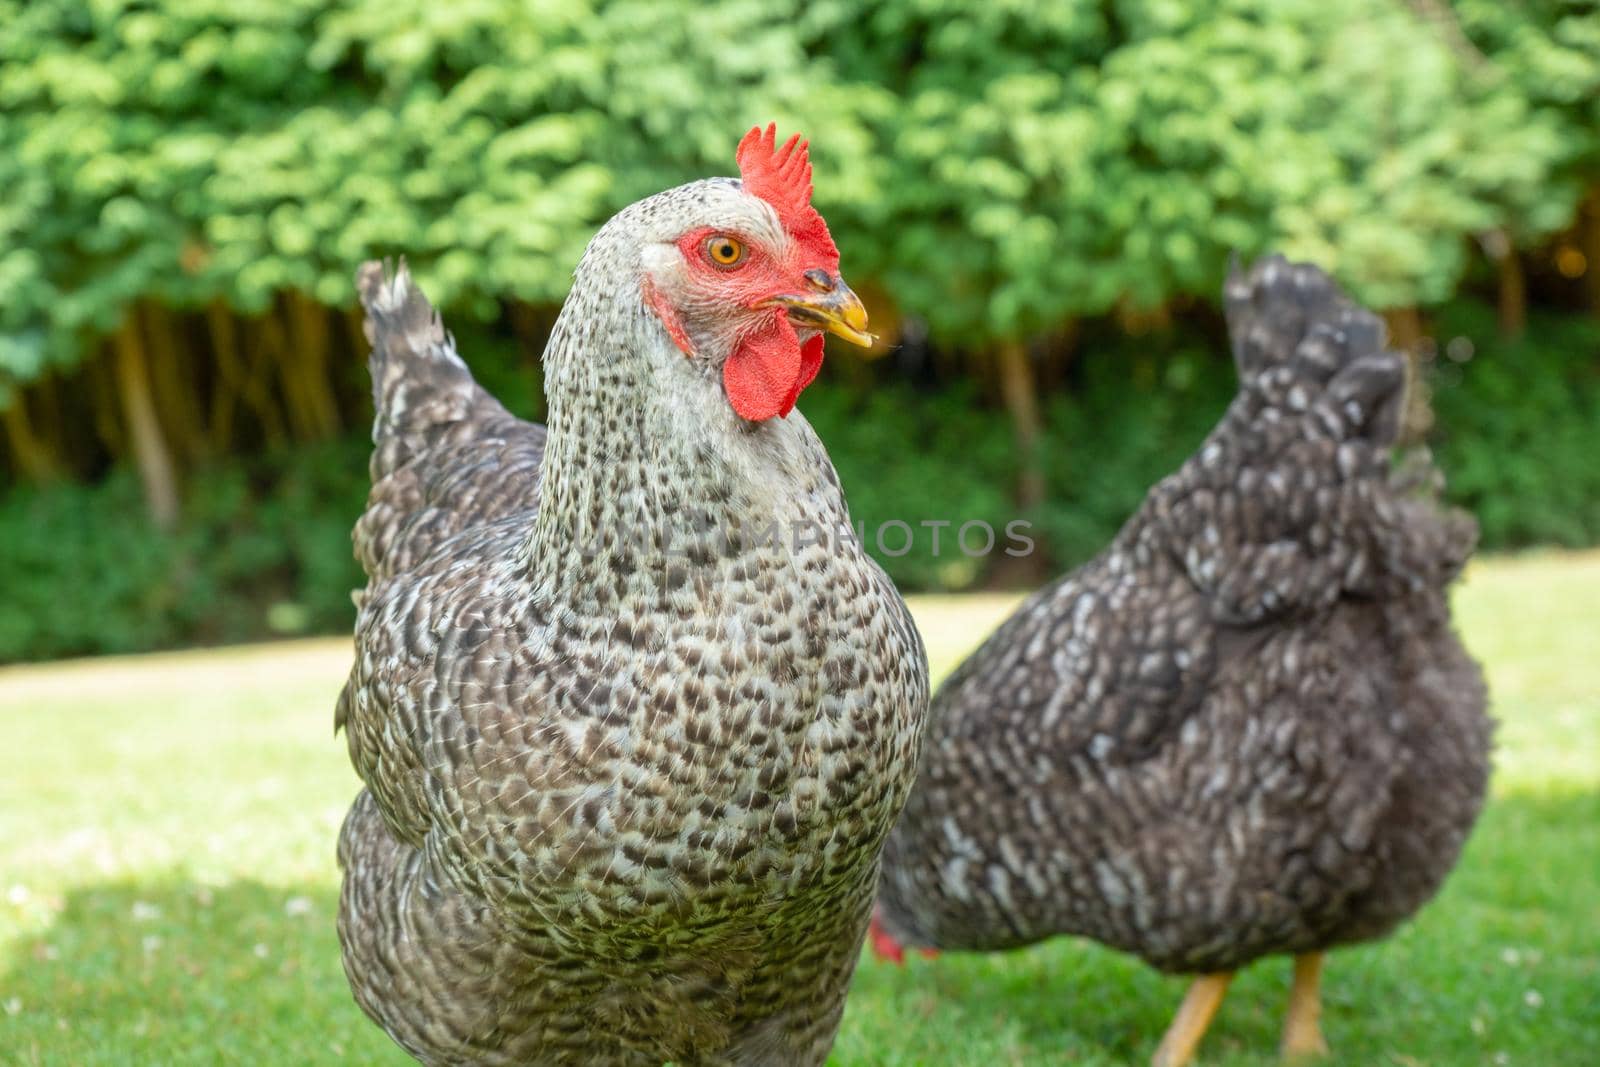 profile hens with one in profile foreground and one in the background on green grass and trees in the background